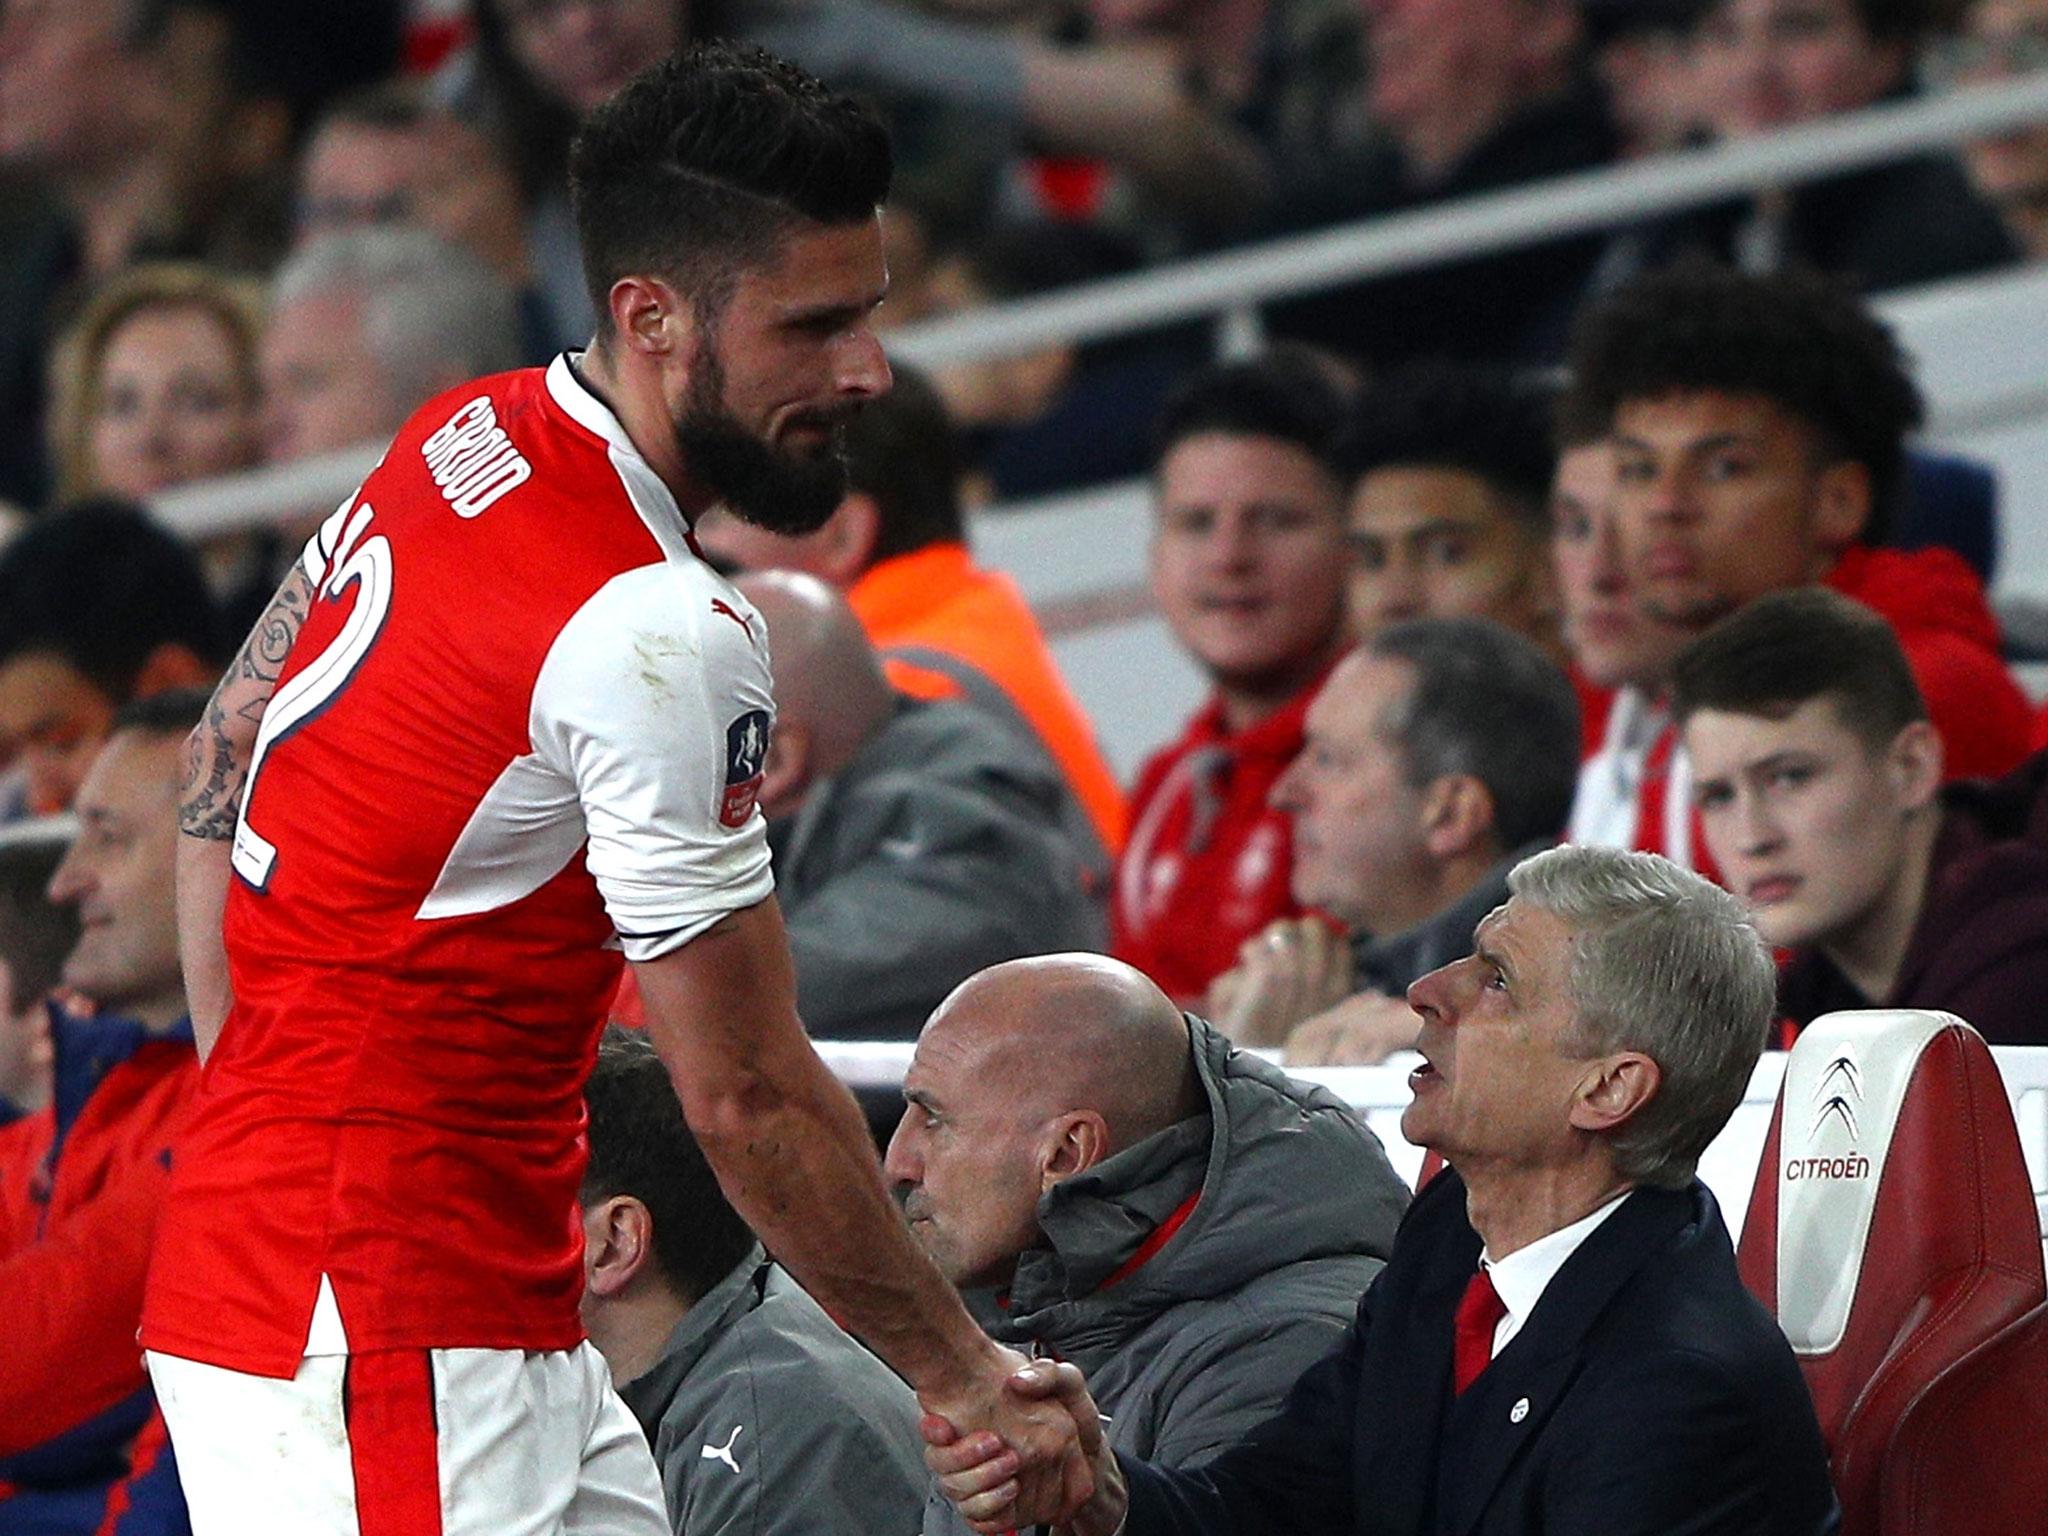 Olivier Giroud says the players want Arsene Wenger to stay at Arsenal